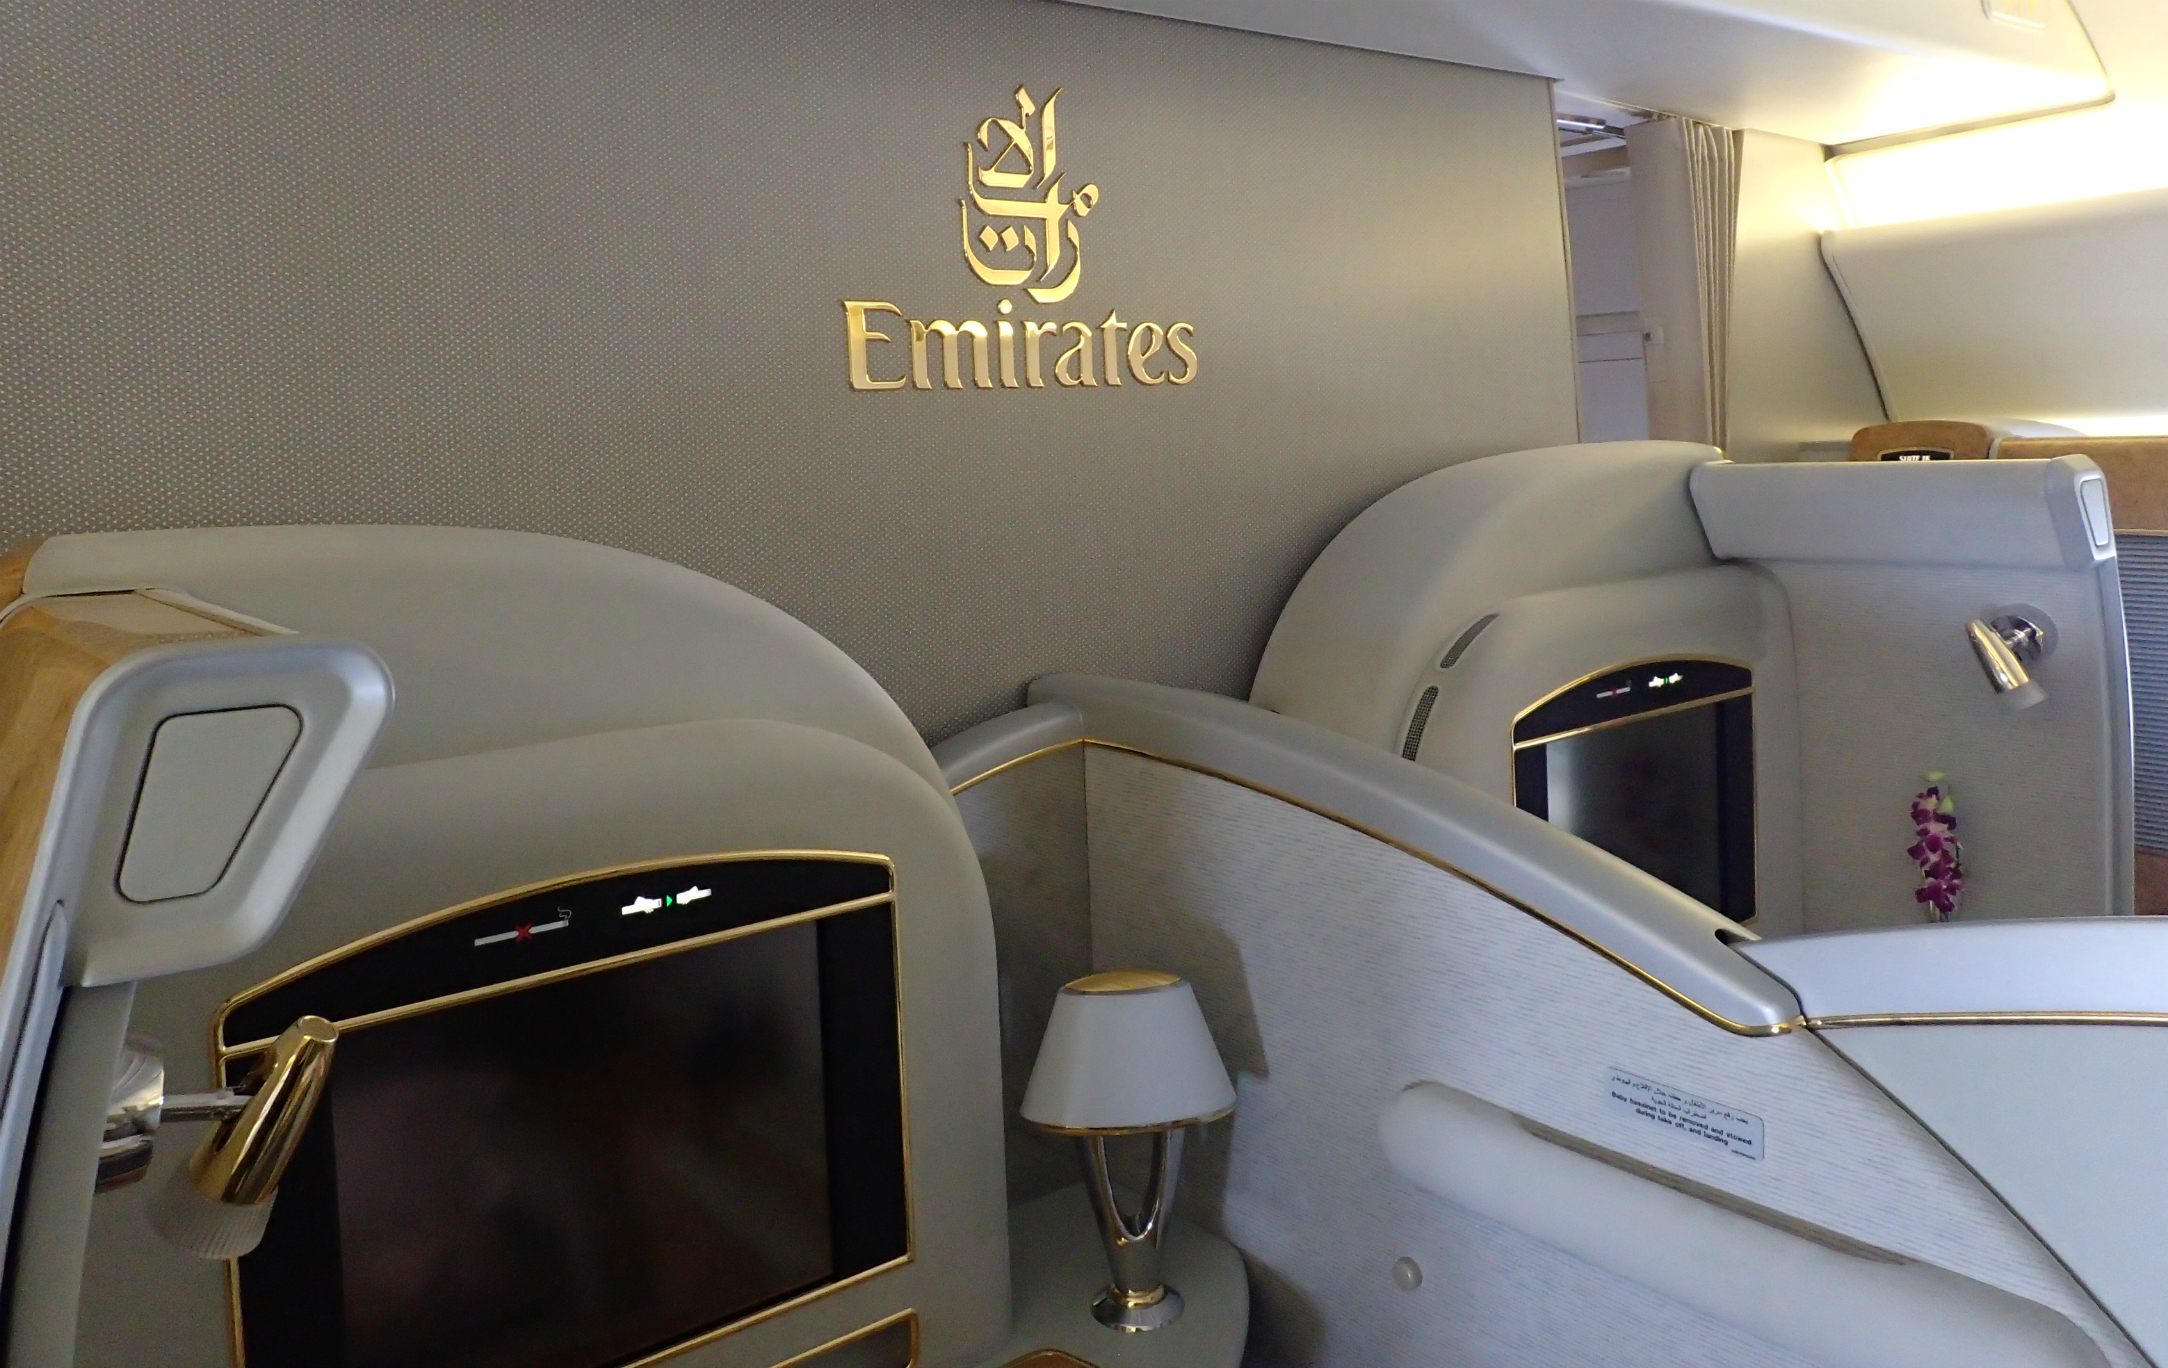 Emirates Airlines [2012] @ Seven Stars global hospitality awards - Follow  our Seven Stars Award teams travel around the world reviewing the finest  establishments and products, comparing these on a basis of